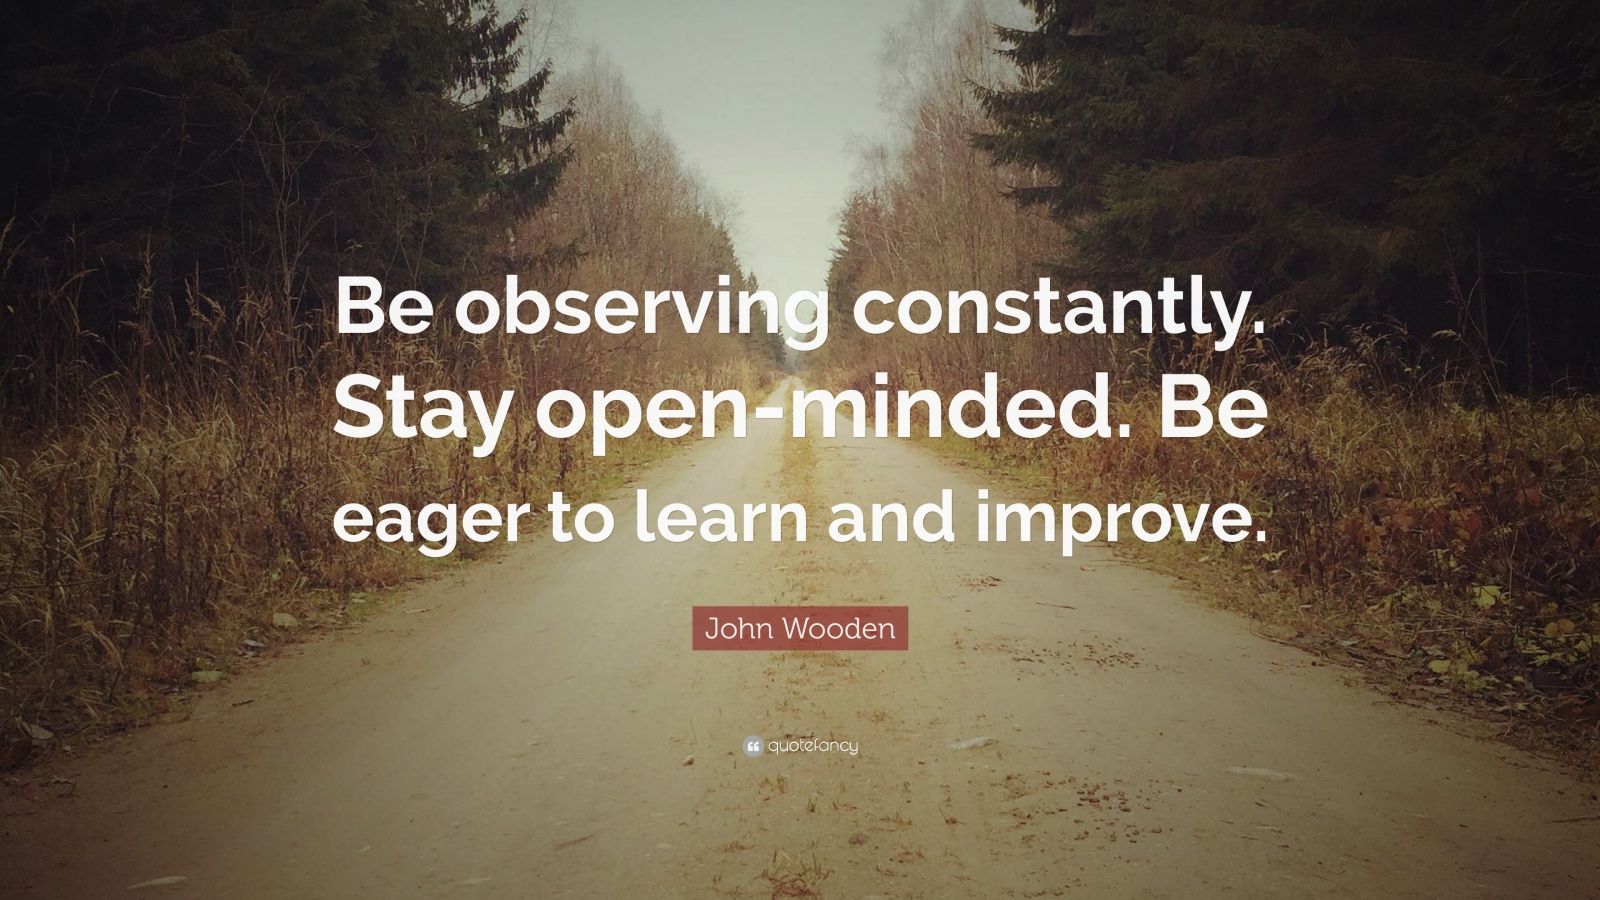 John Wooden Quote “Be observing constantly. Stay openminded. Be eager